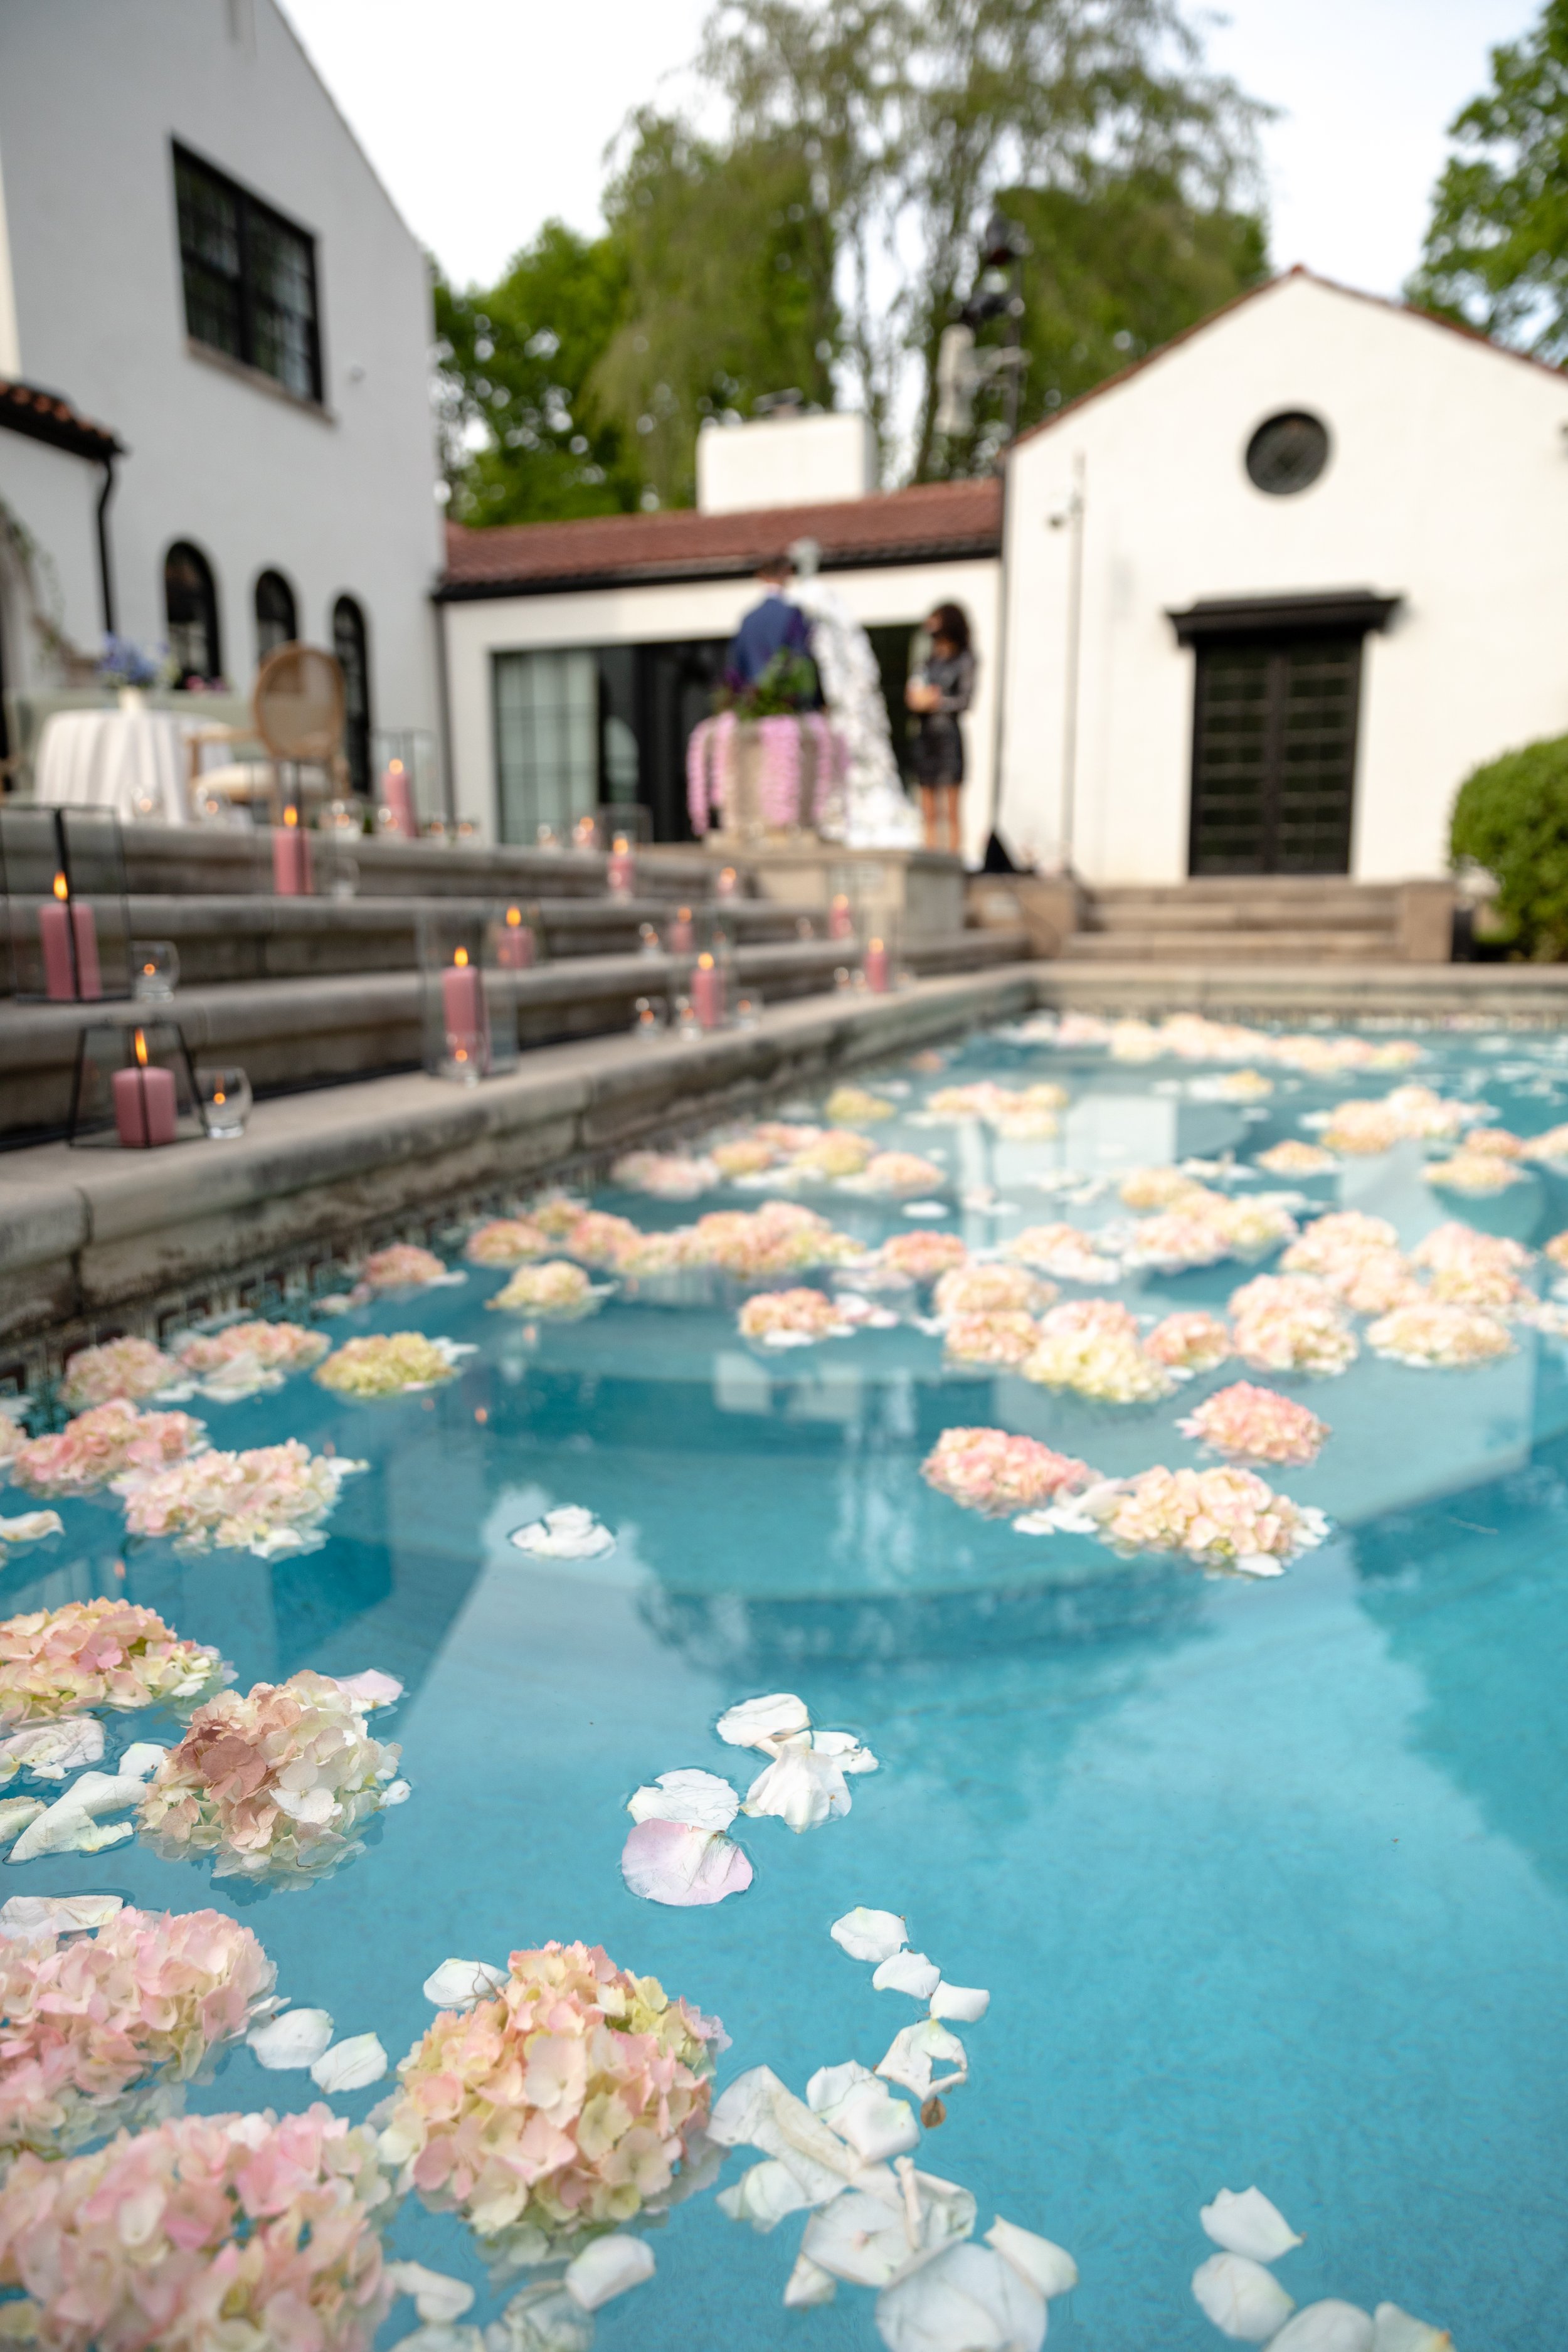 Bridgerton inspired engagement party at a private home in Nashville, TN with pastel candles and flowers floating in the pool.